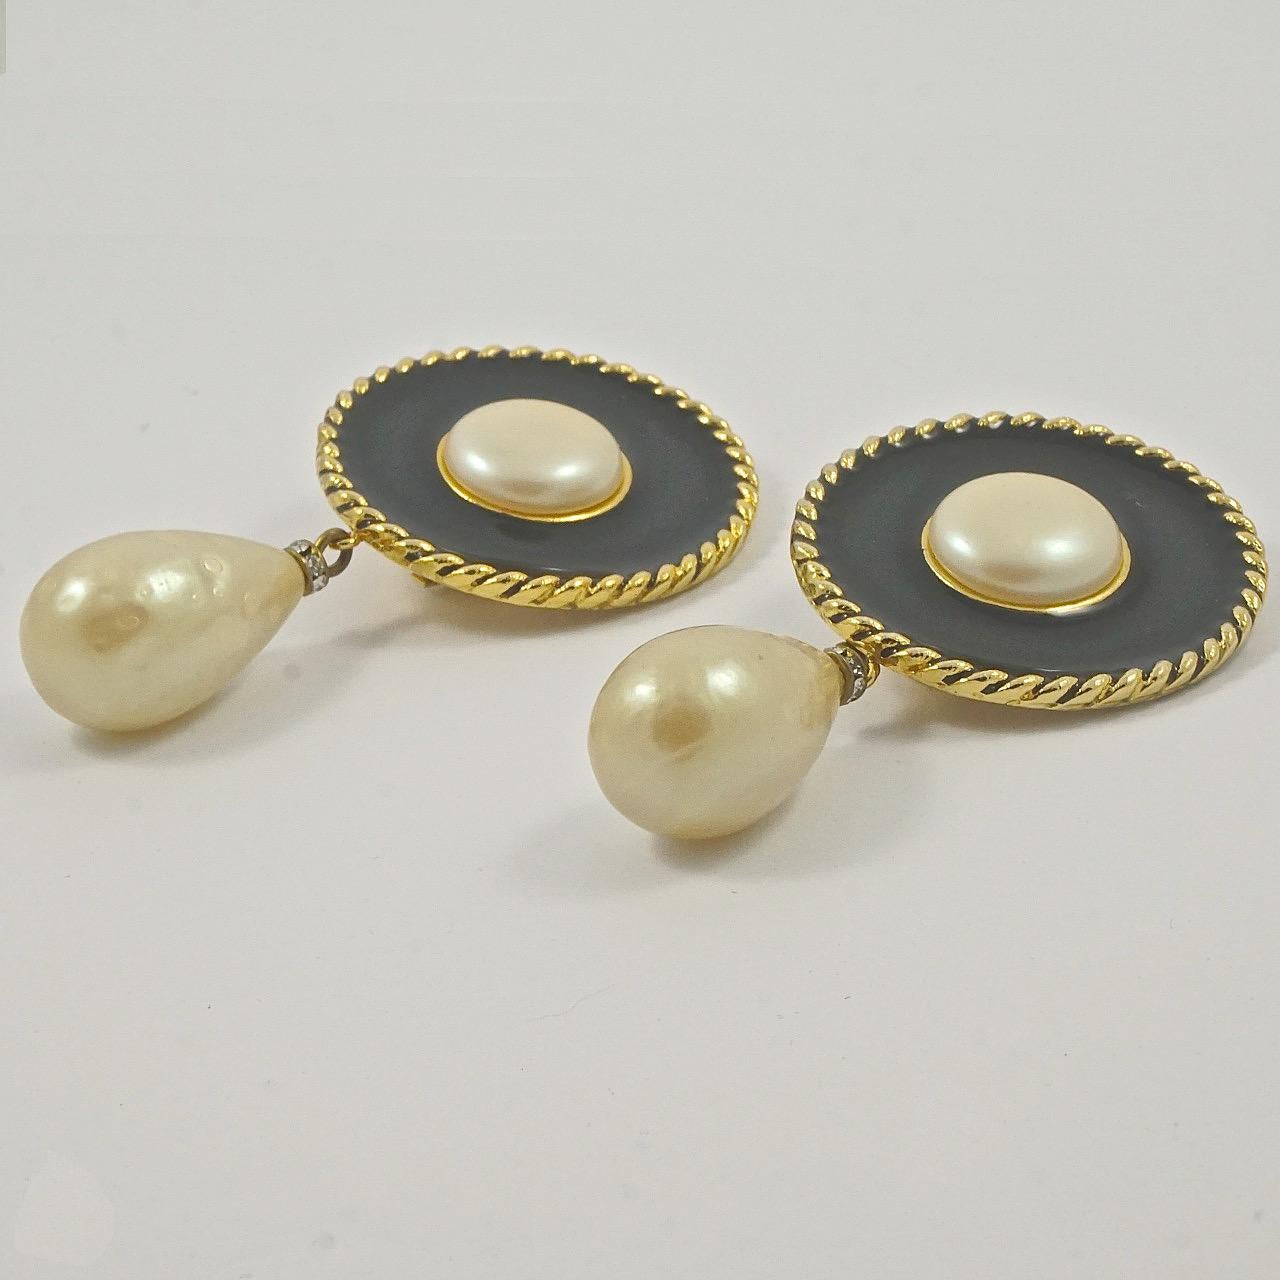 Gold Plated Faux Pearl Black Enamel Rhinestone Clip On Drop Earrings In Good Condition For Sale In London, GB